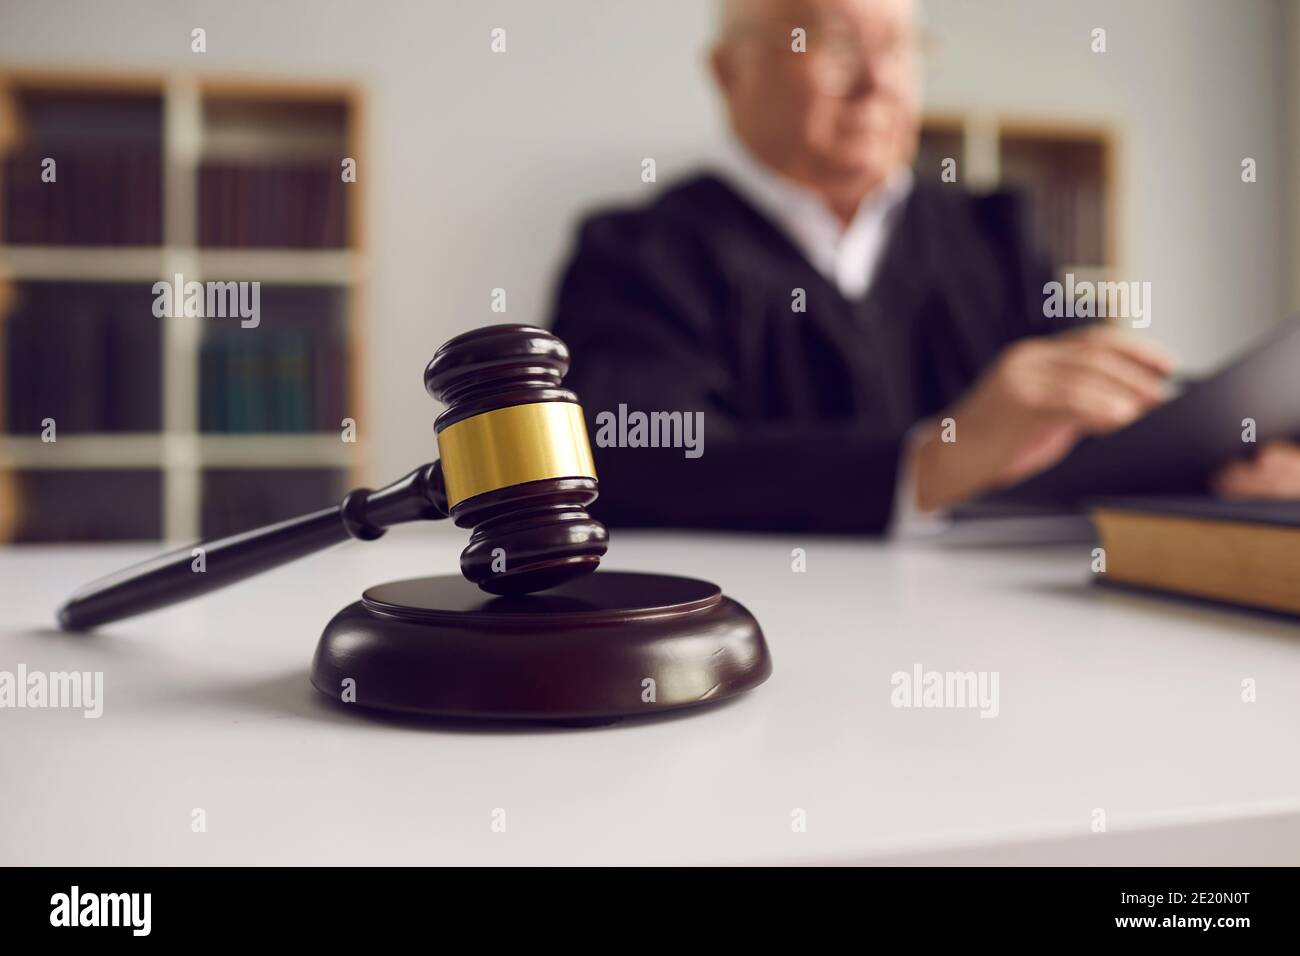 Close-up of wooden gavel placed on sound block on judge's table during court hearing Stock Photo